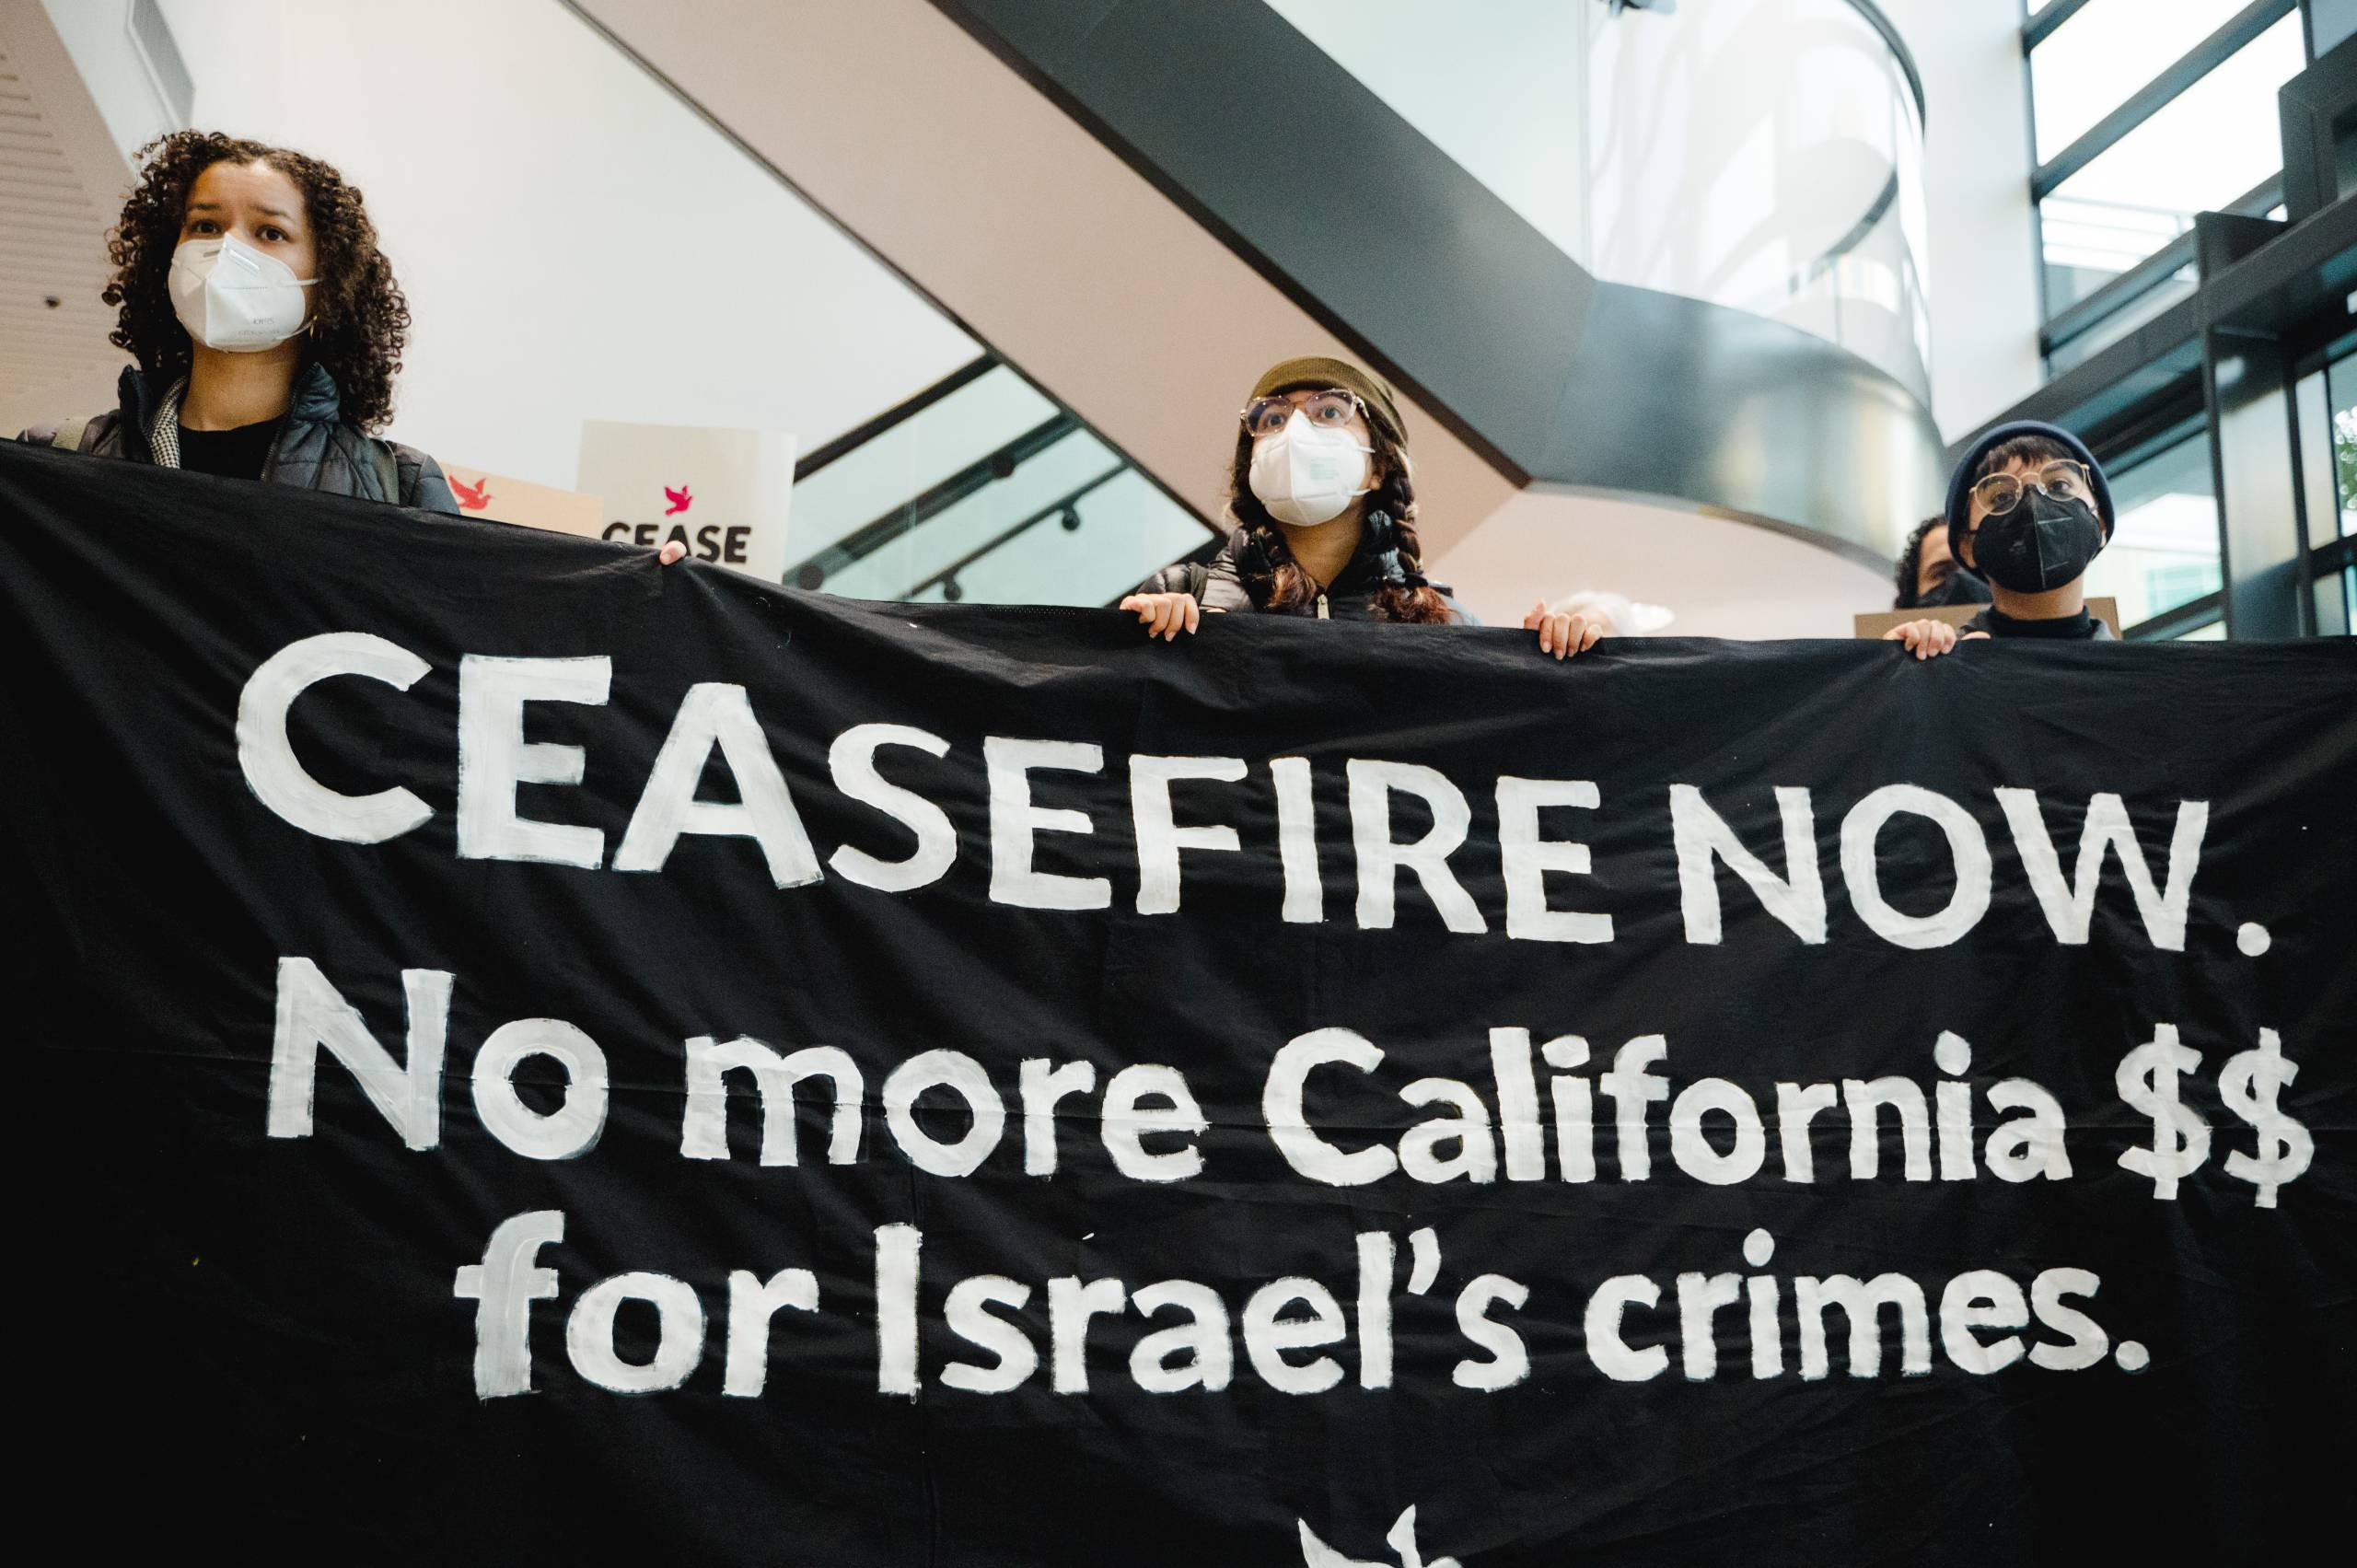 Three activists wearing white masks hold up a black banner that reads "No more California money for Israel's crimes." 